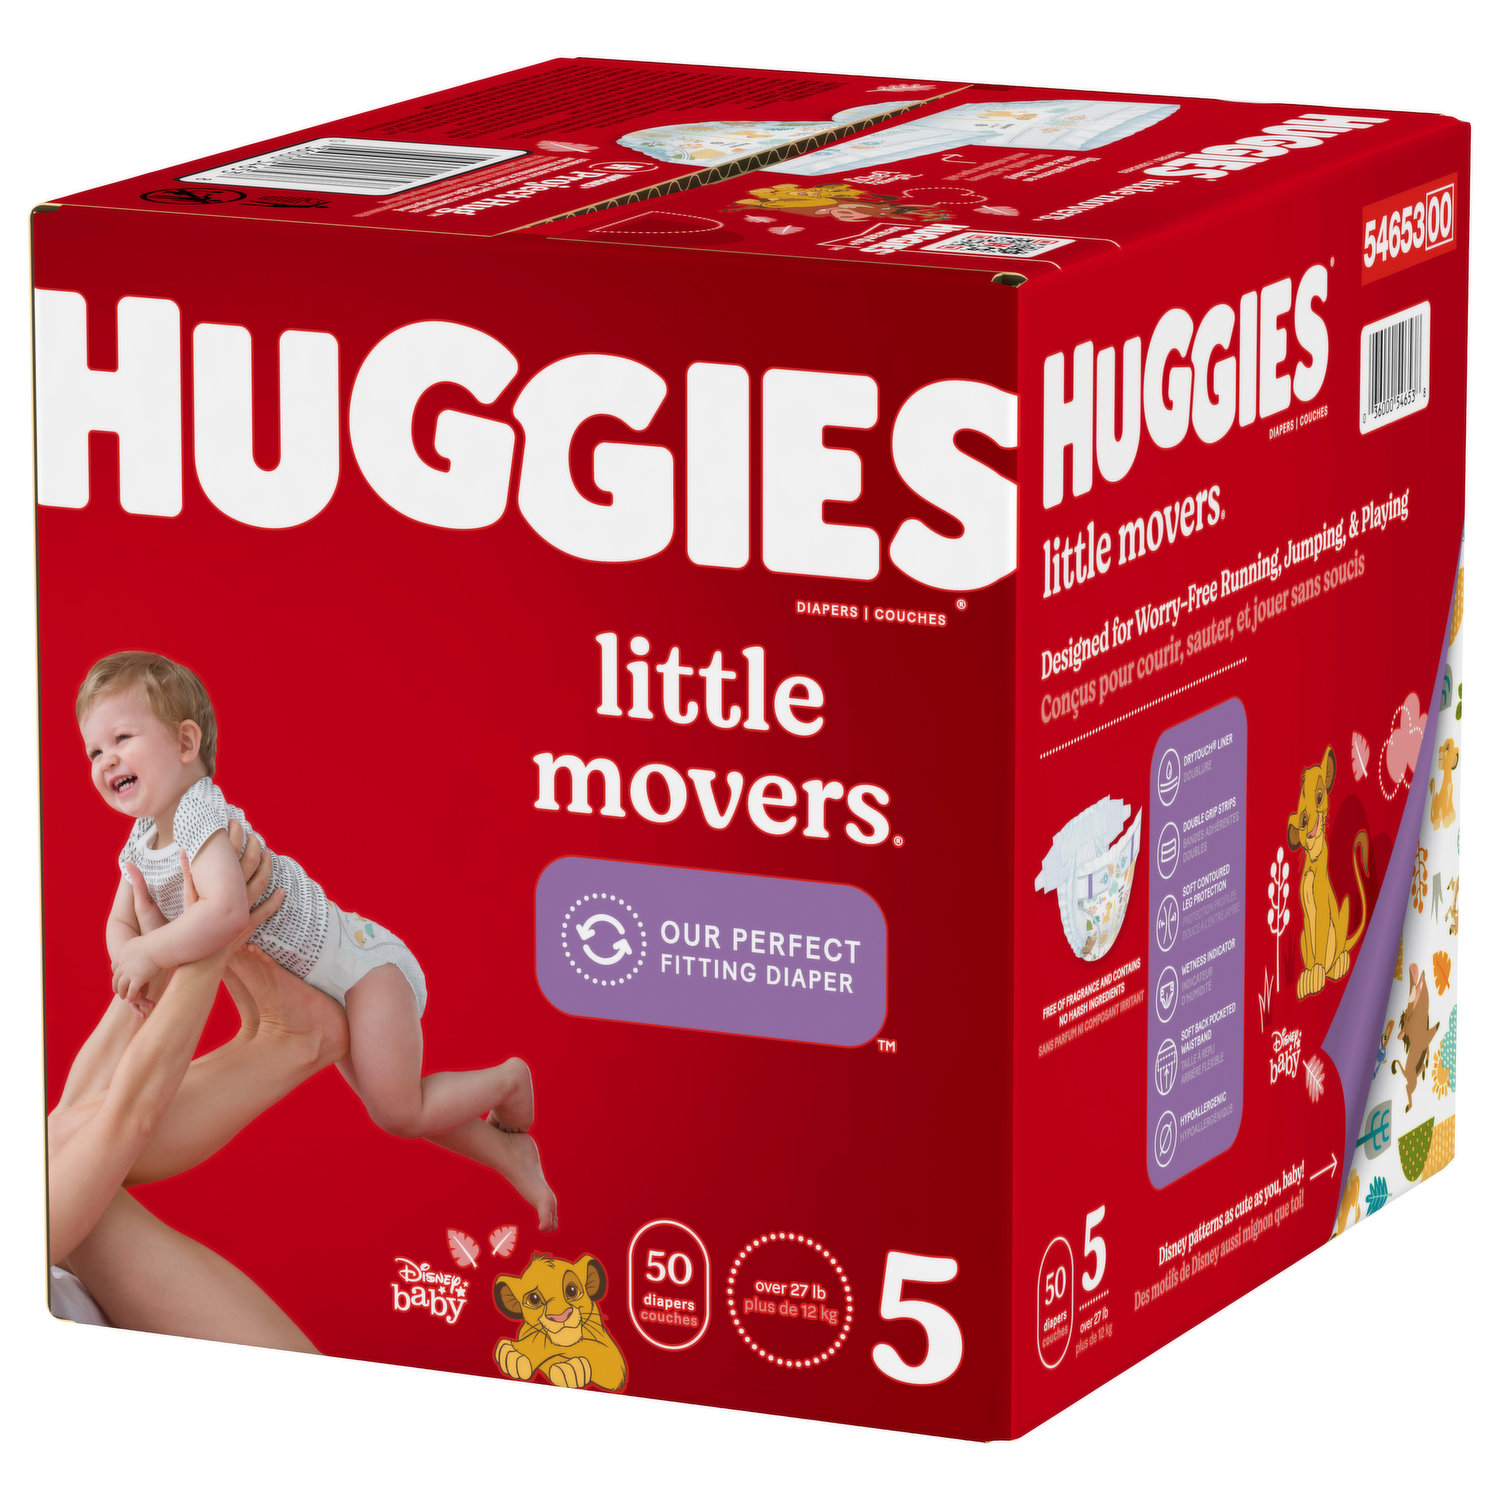 Huggies Extra Care Pants Disney Baby Taille 5 24uts